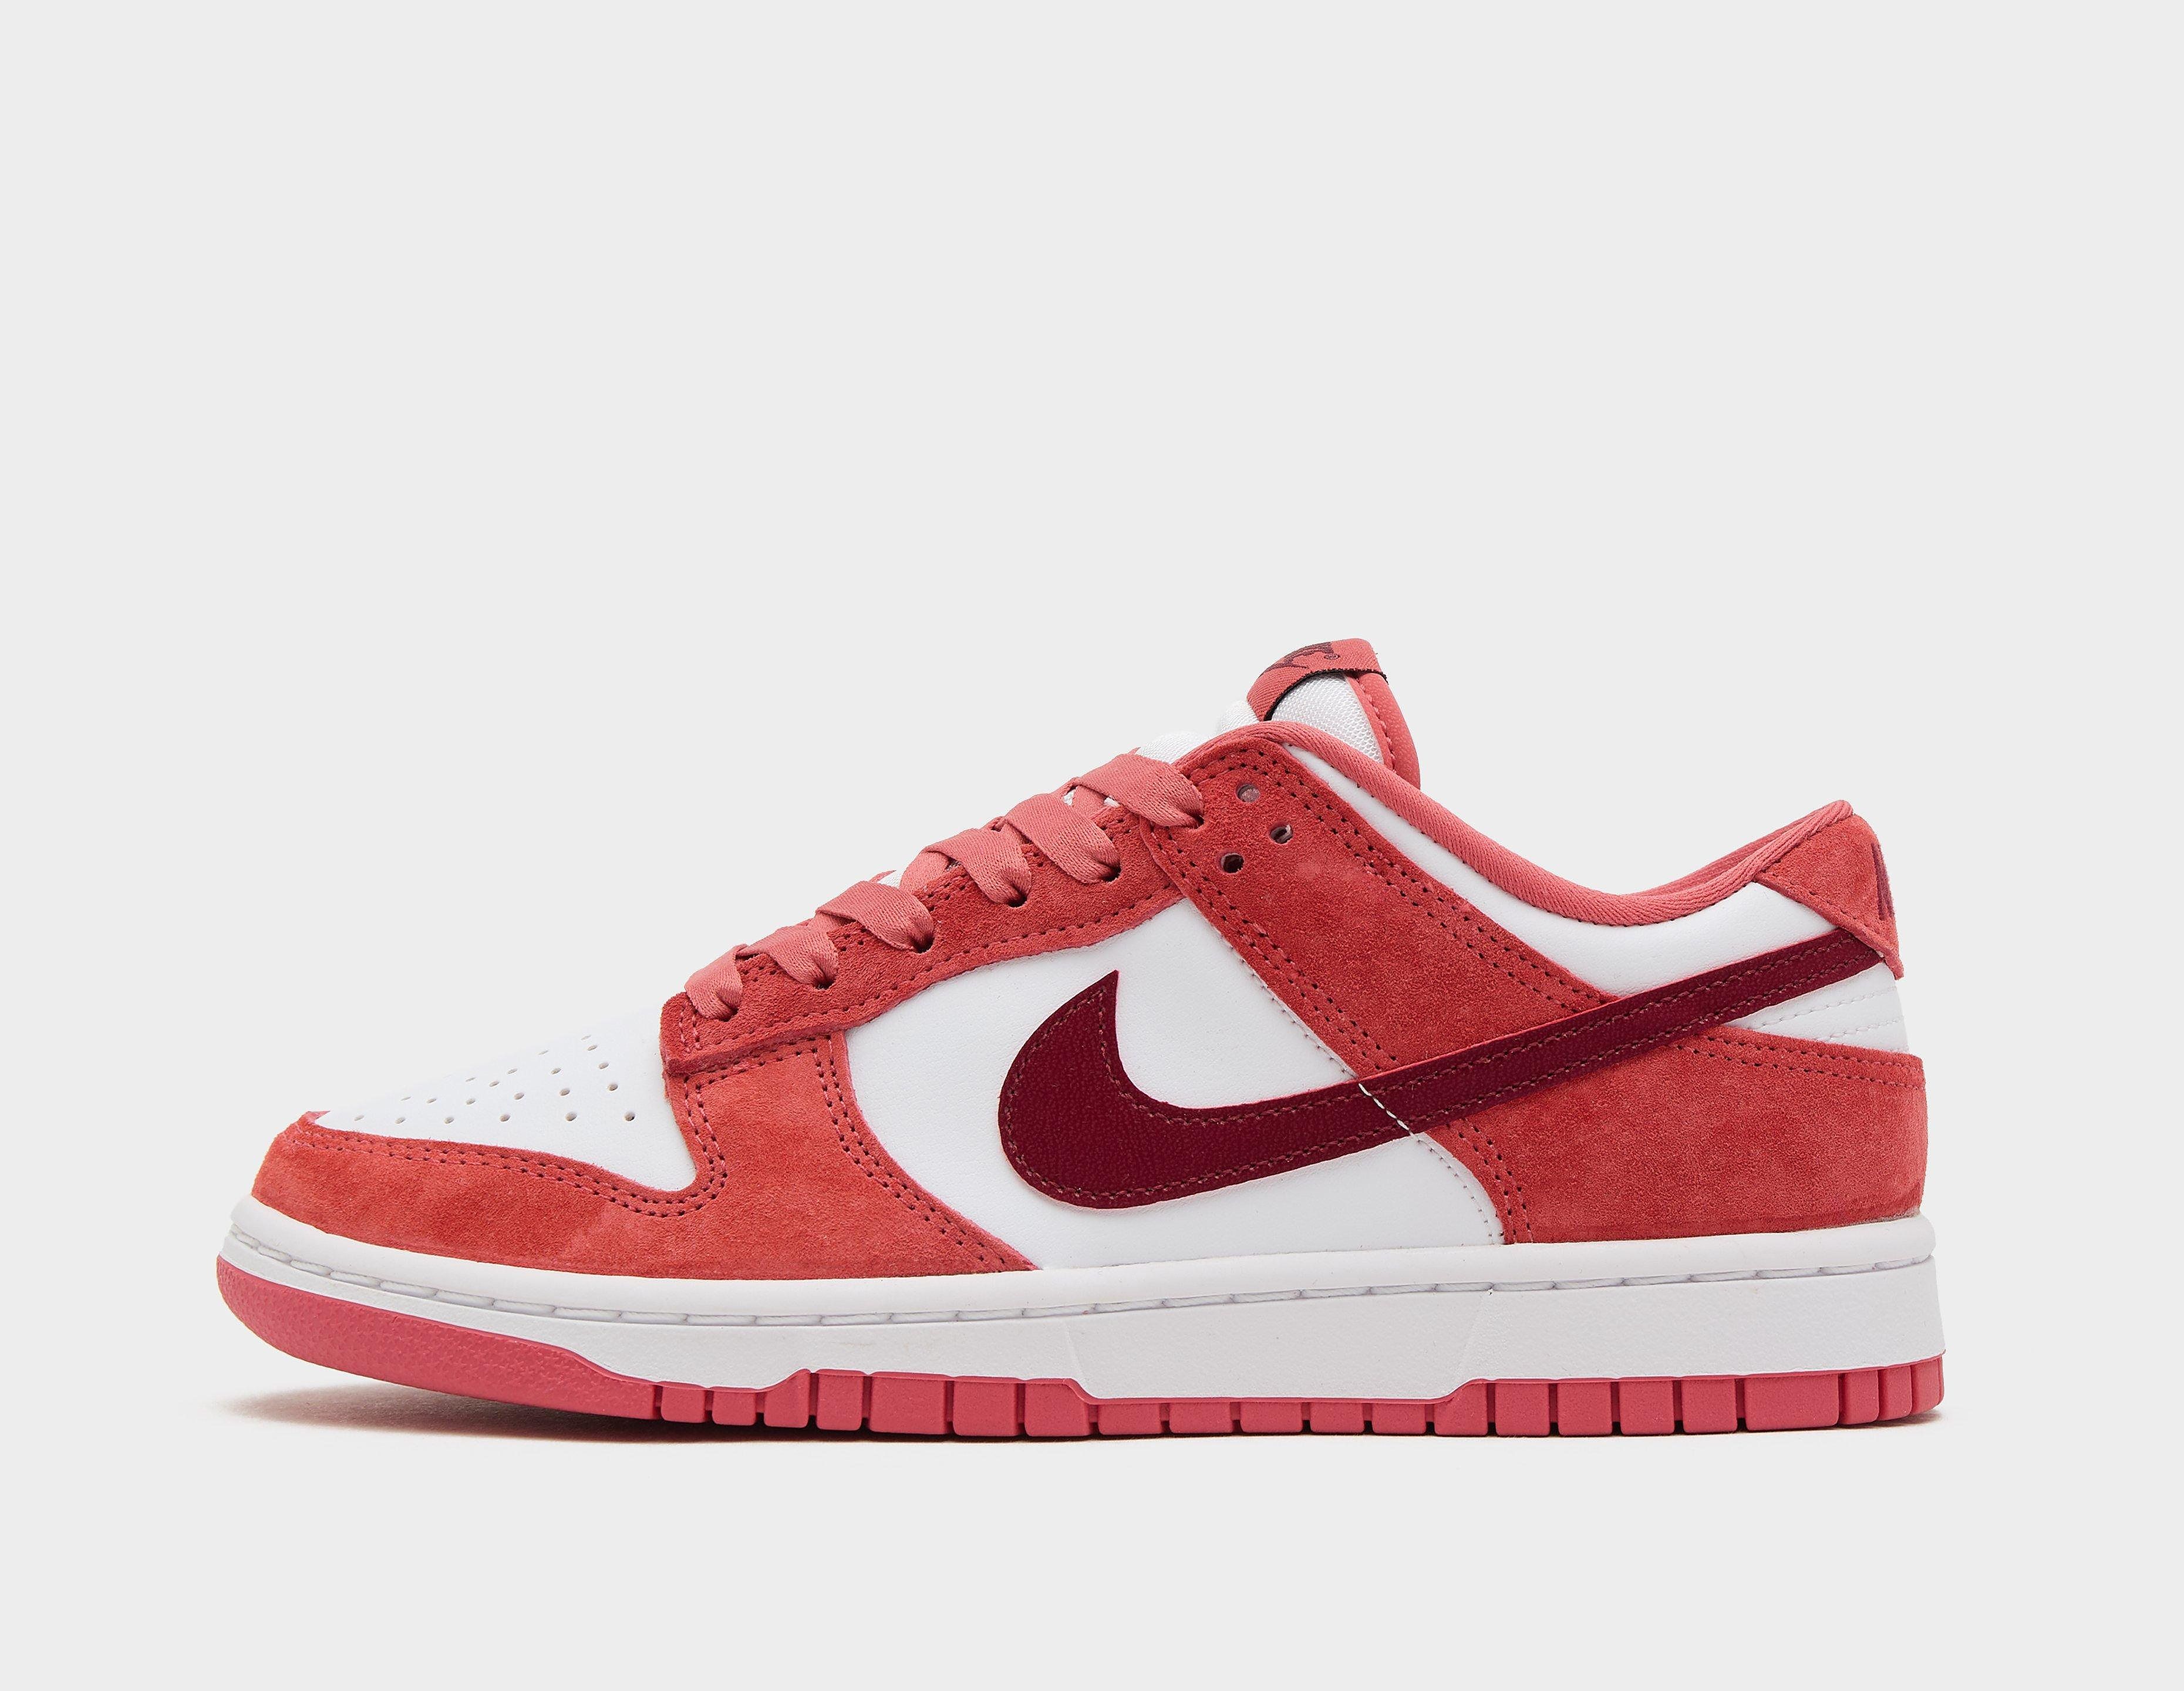 Nike Dunk Low Femme, Red